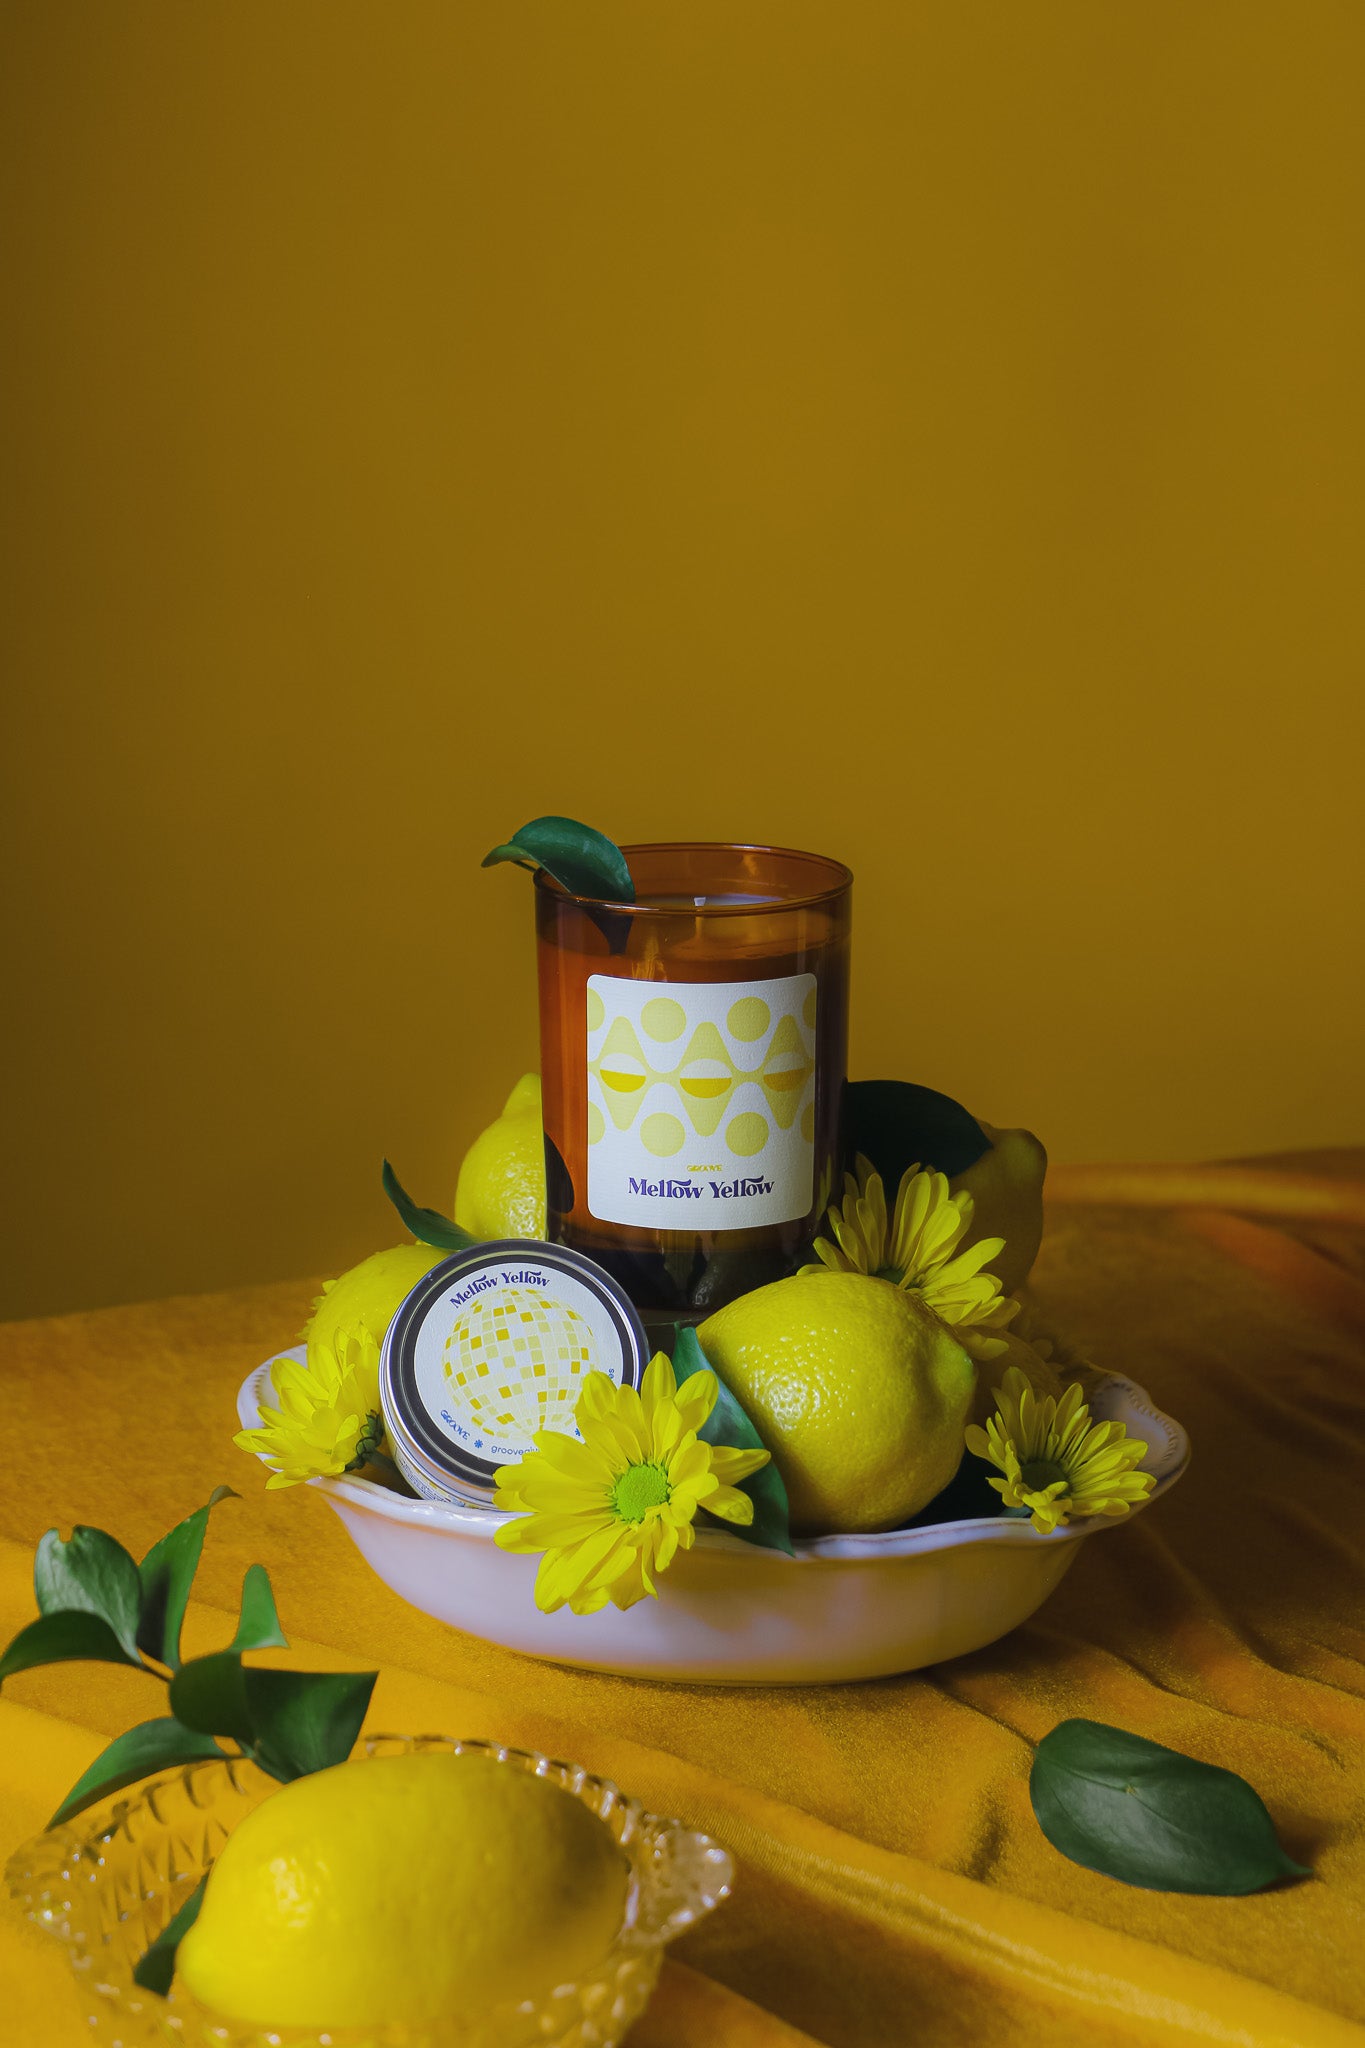 Mellow Yellow Classic Candle